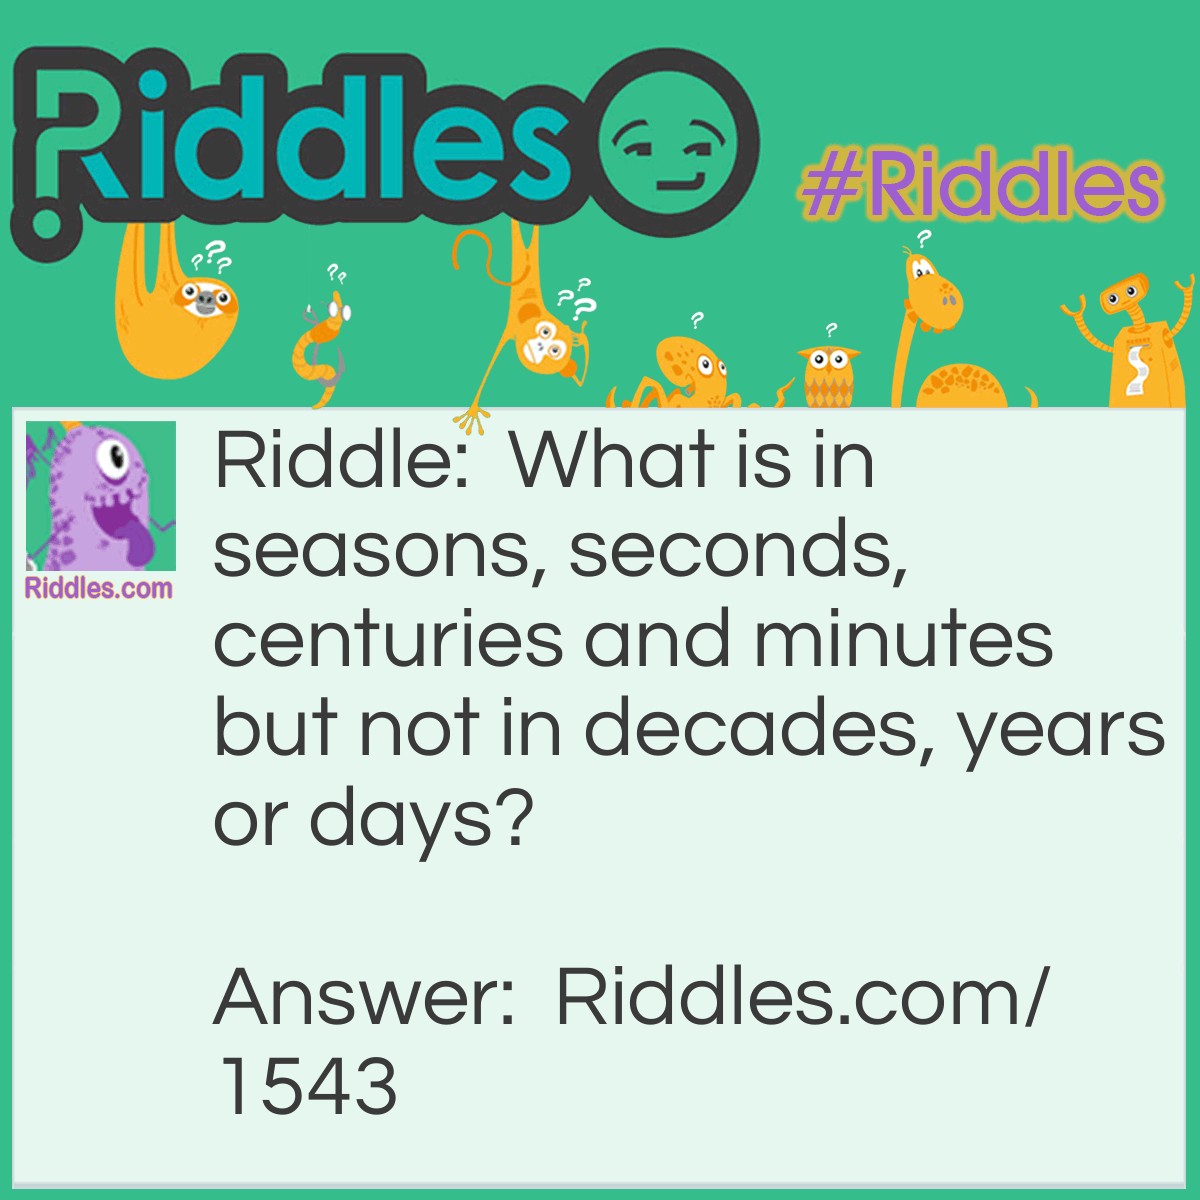 Riddle: What is in seasons, seconds, centuries and minutes but not in decades, years or days? Answer: The letter ‘n’